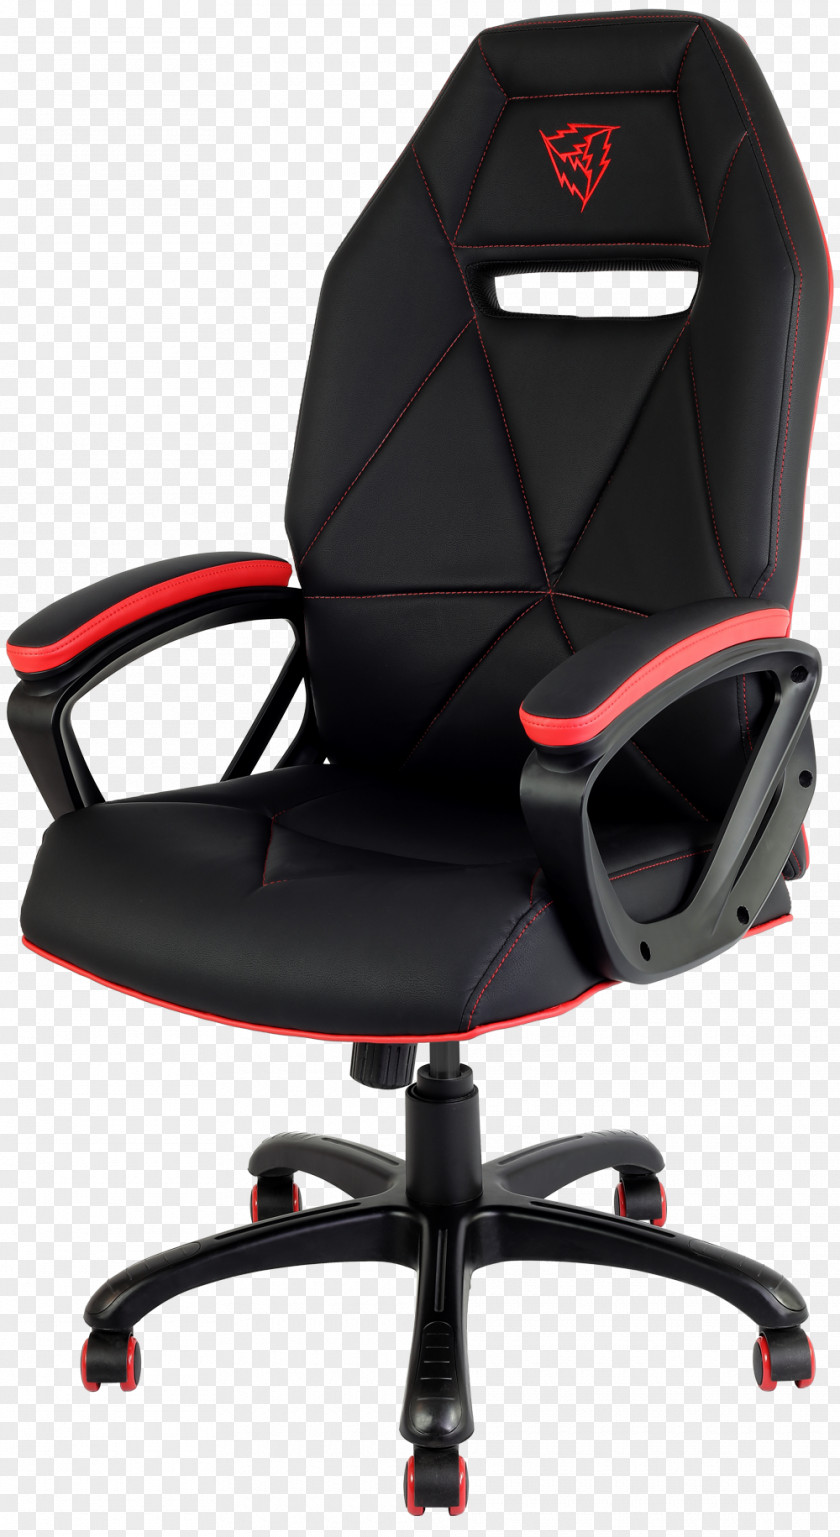 Thunder Wing Chair Computer Price Shop PNG